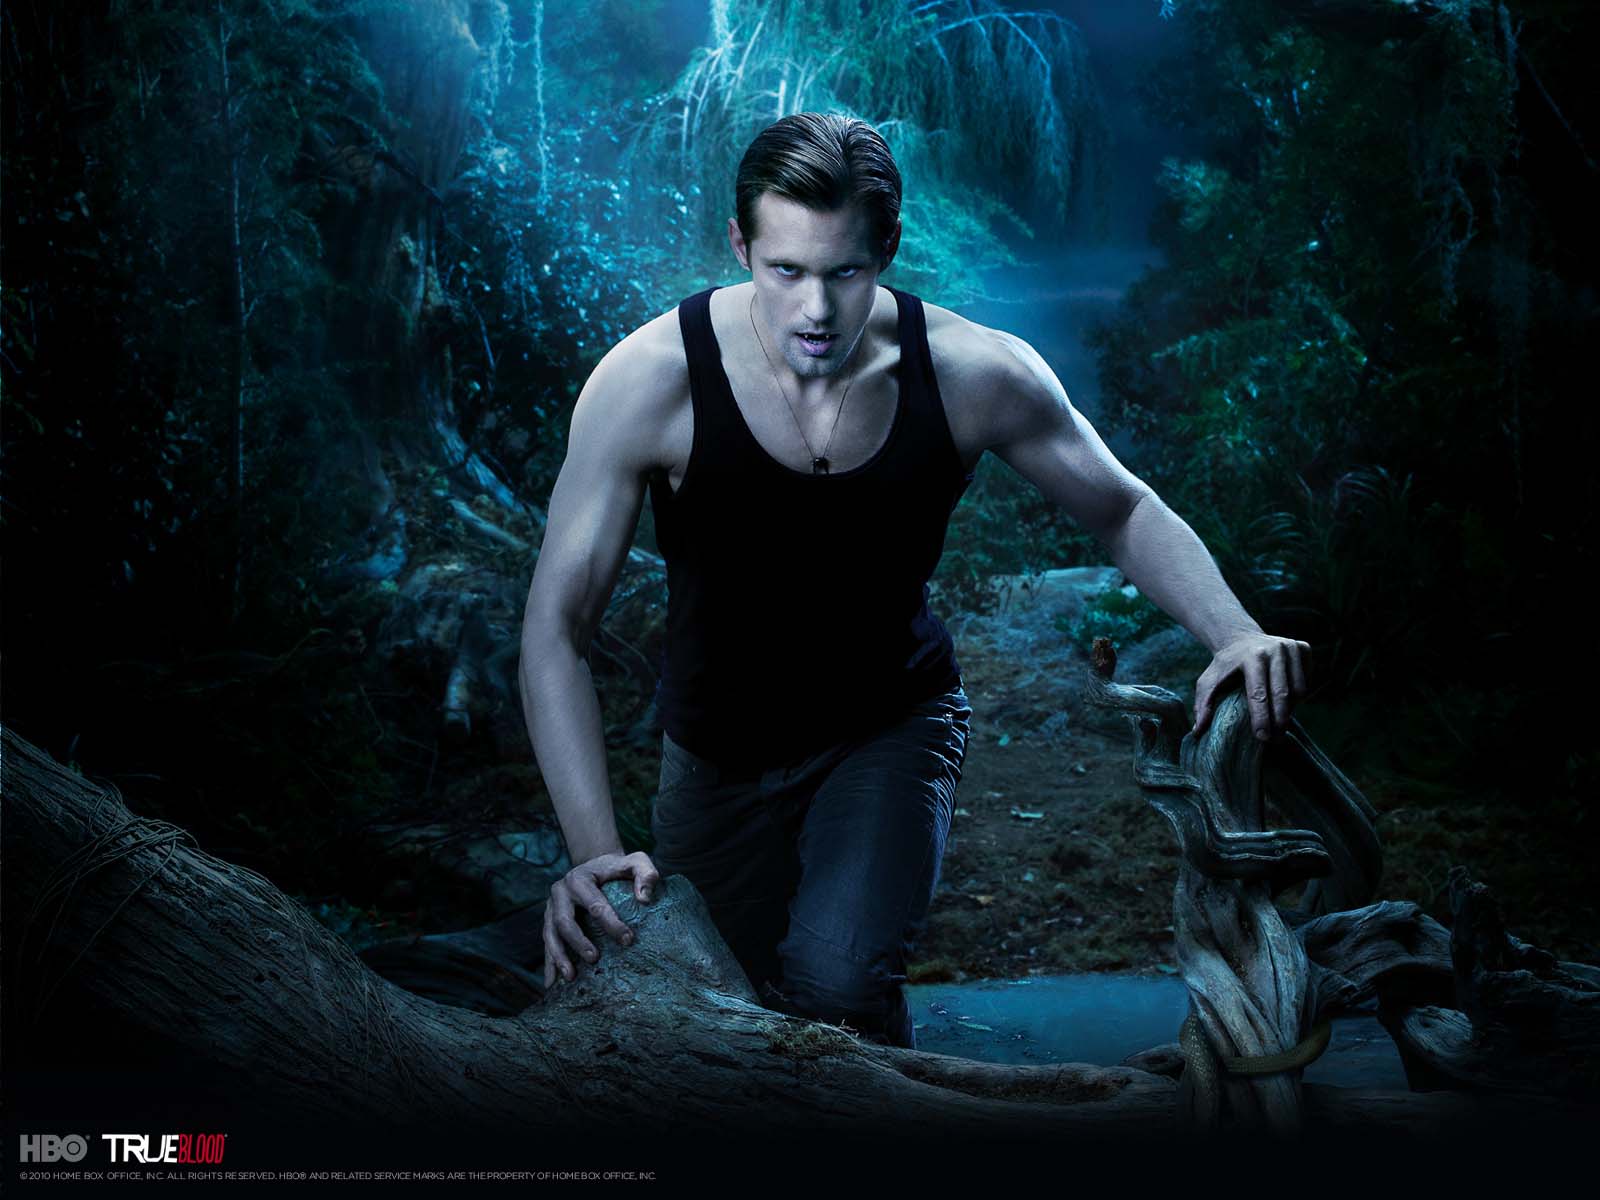 MILLION OF WALLPAPERS.COM: TRUE BLOOD HBO ORIGINAL SERIE WALLPAPERS